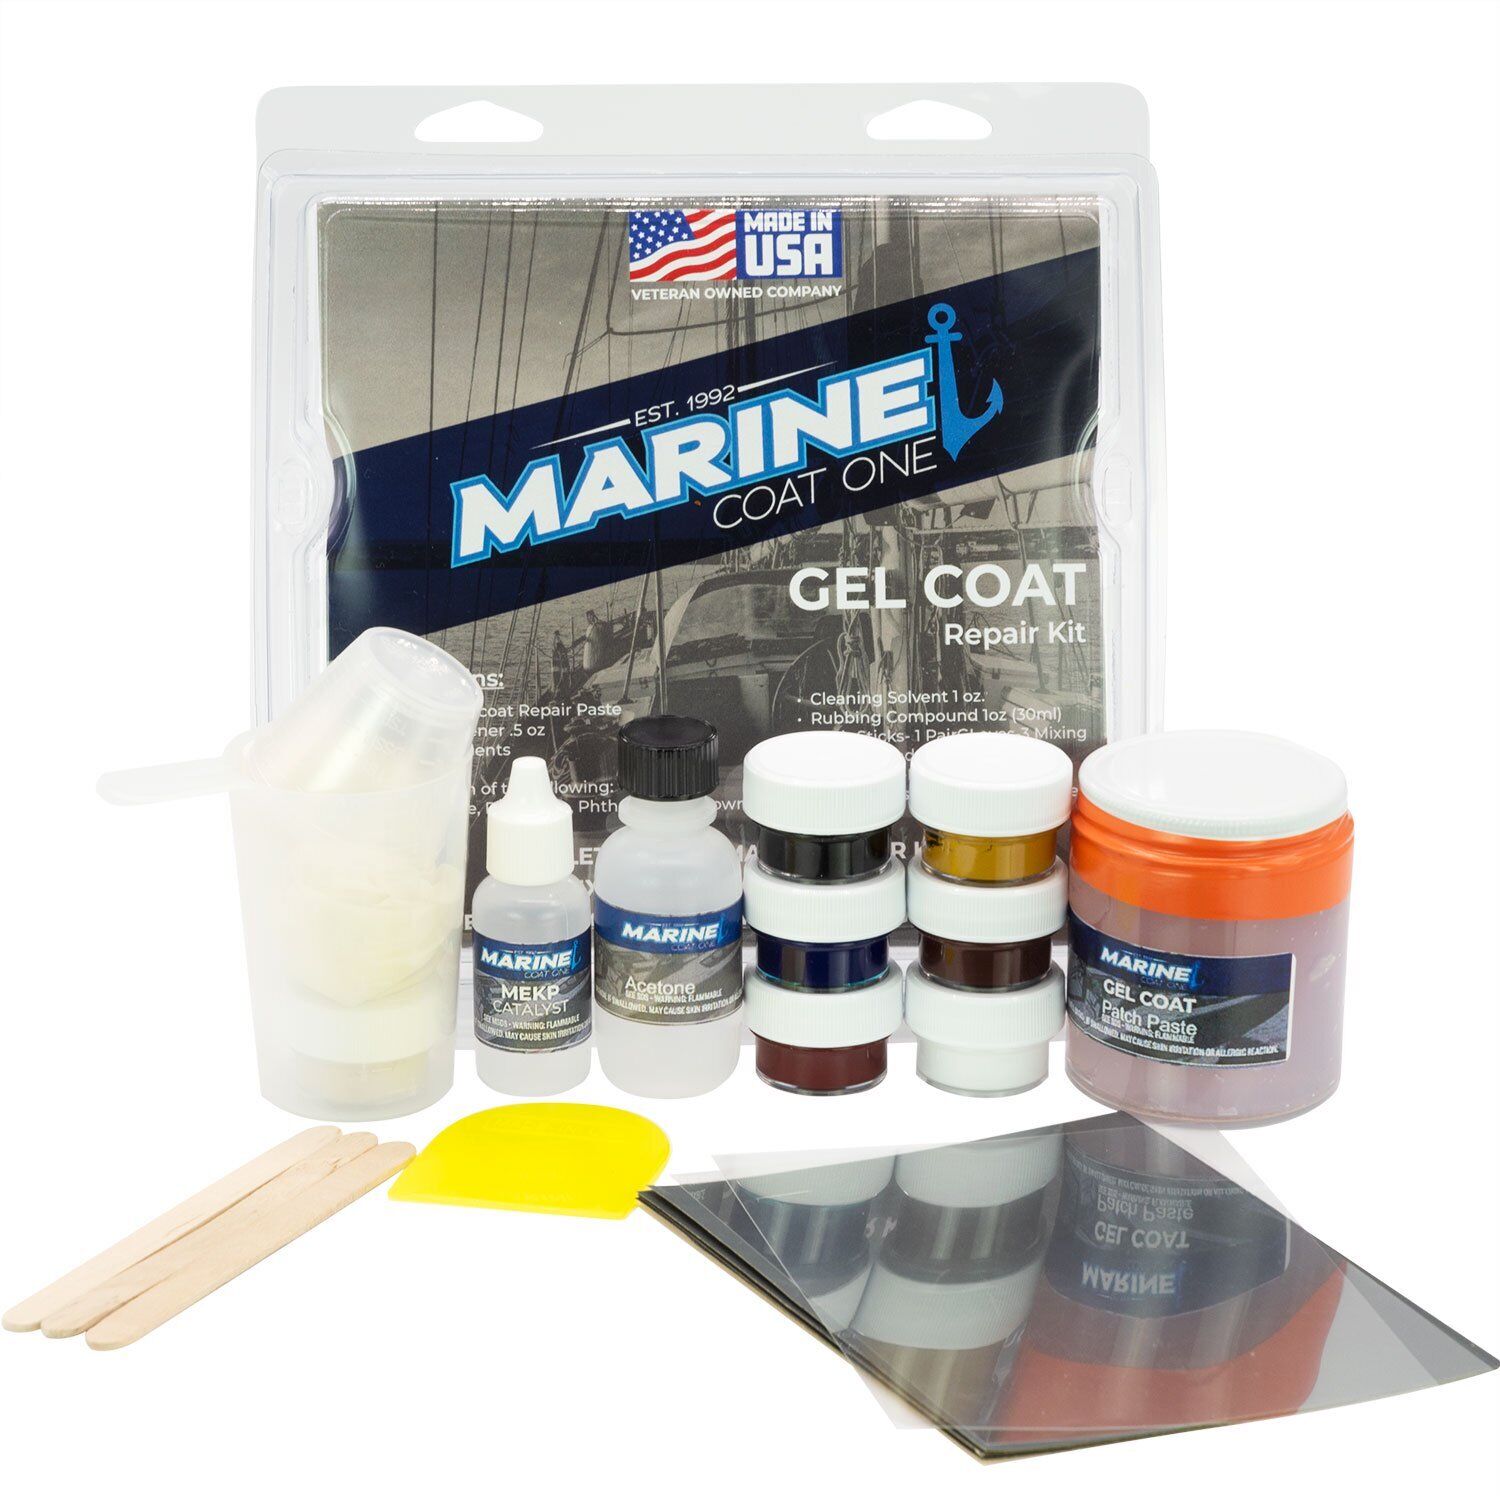 Marine Coat One, Gelcoat Repair Kit For Boat with Complete Color Match Set